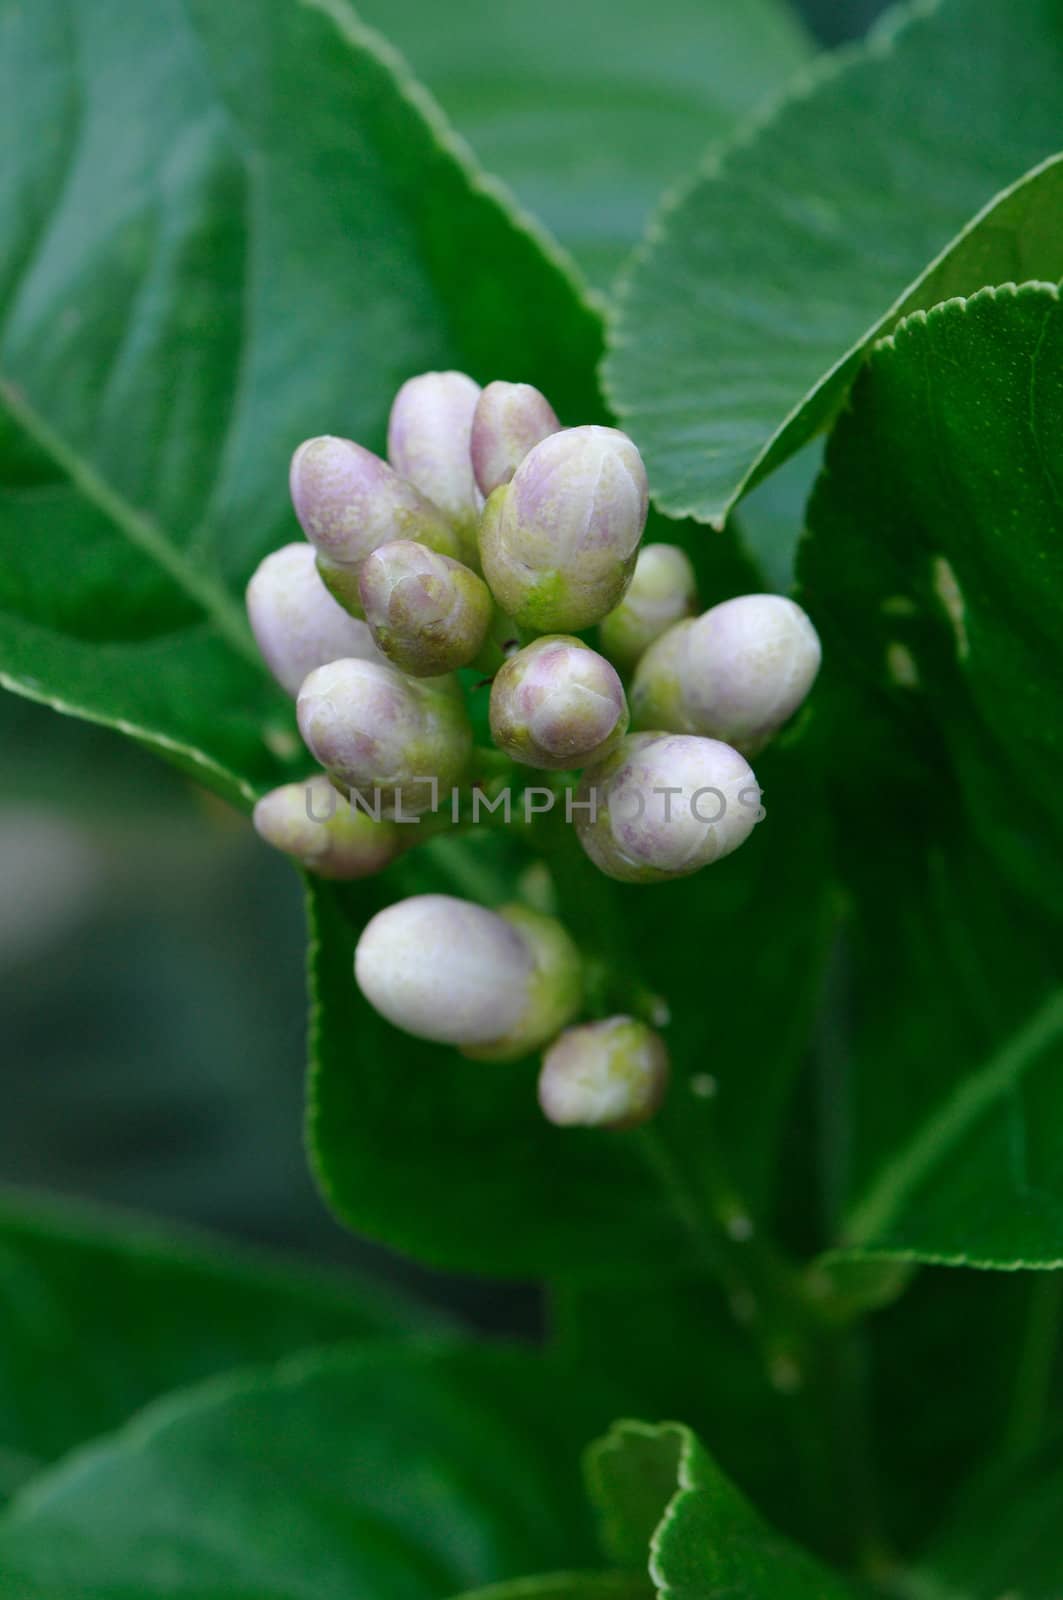 Tuft of white buds with green leafs by shkyo30